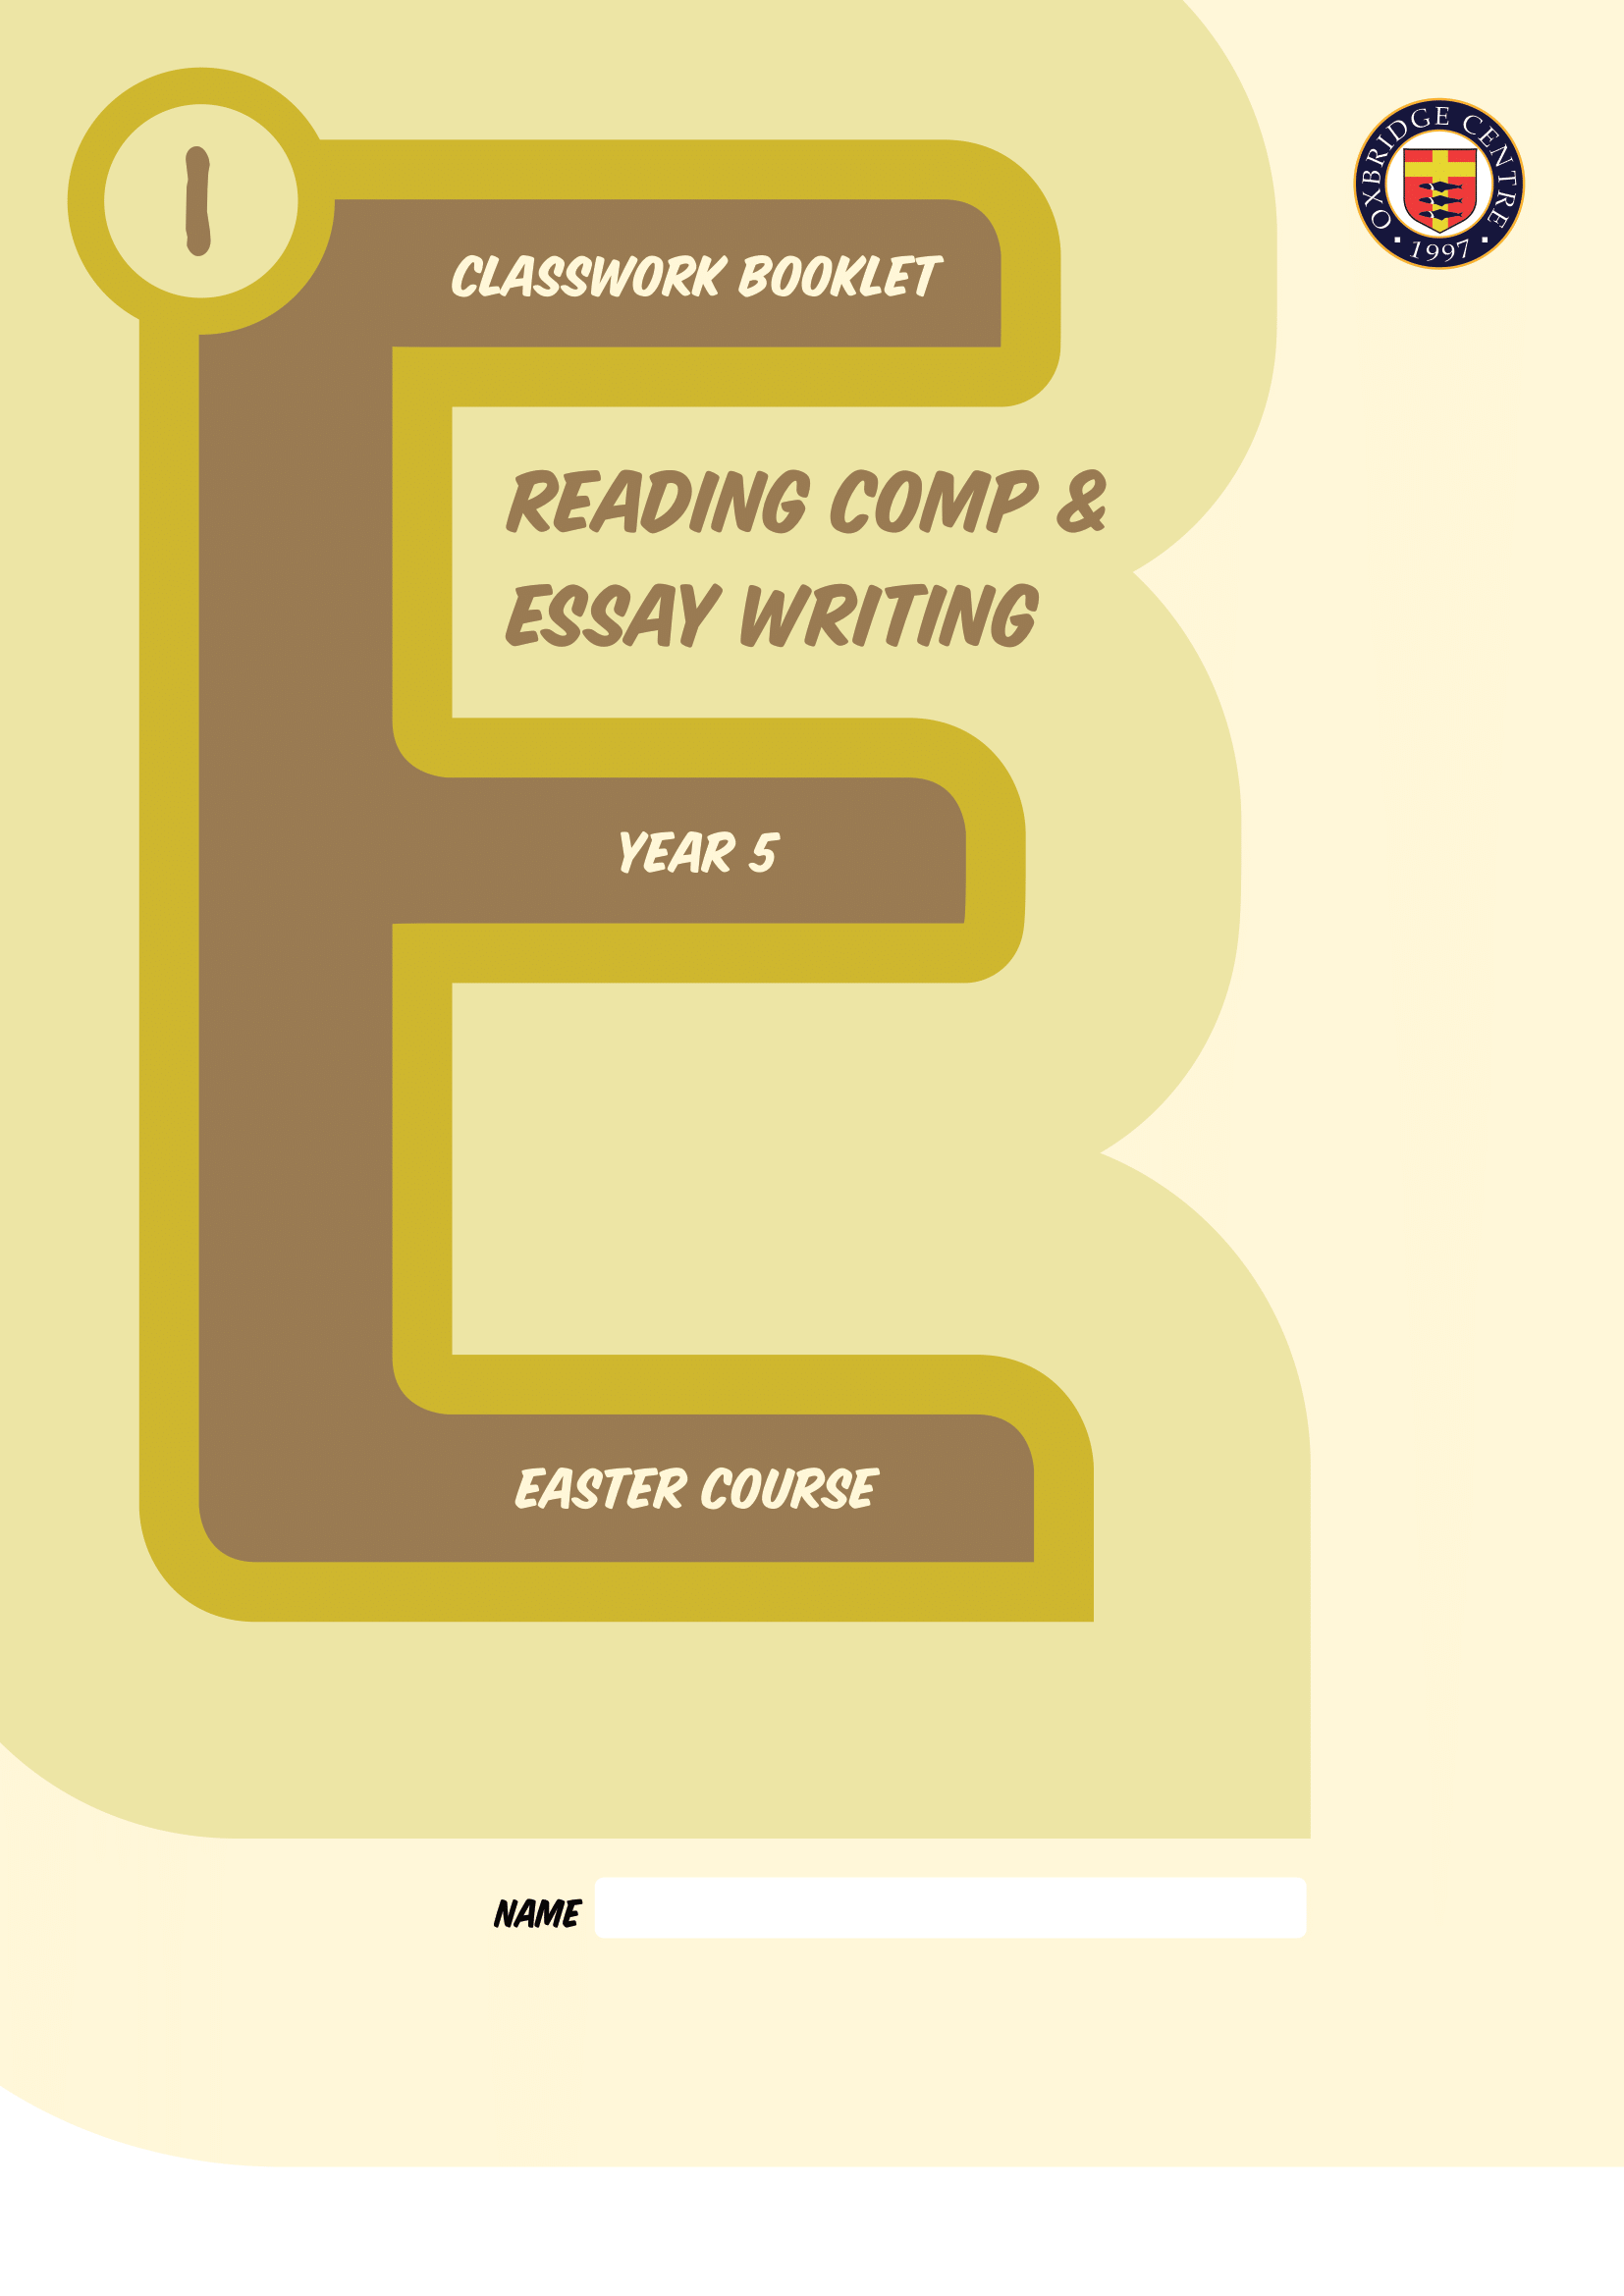 Year 5 Essay Writing booklet thumbnail